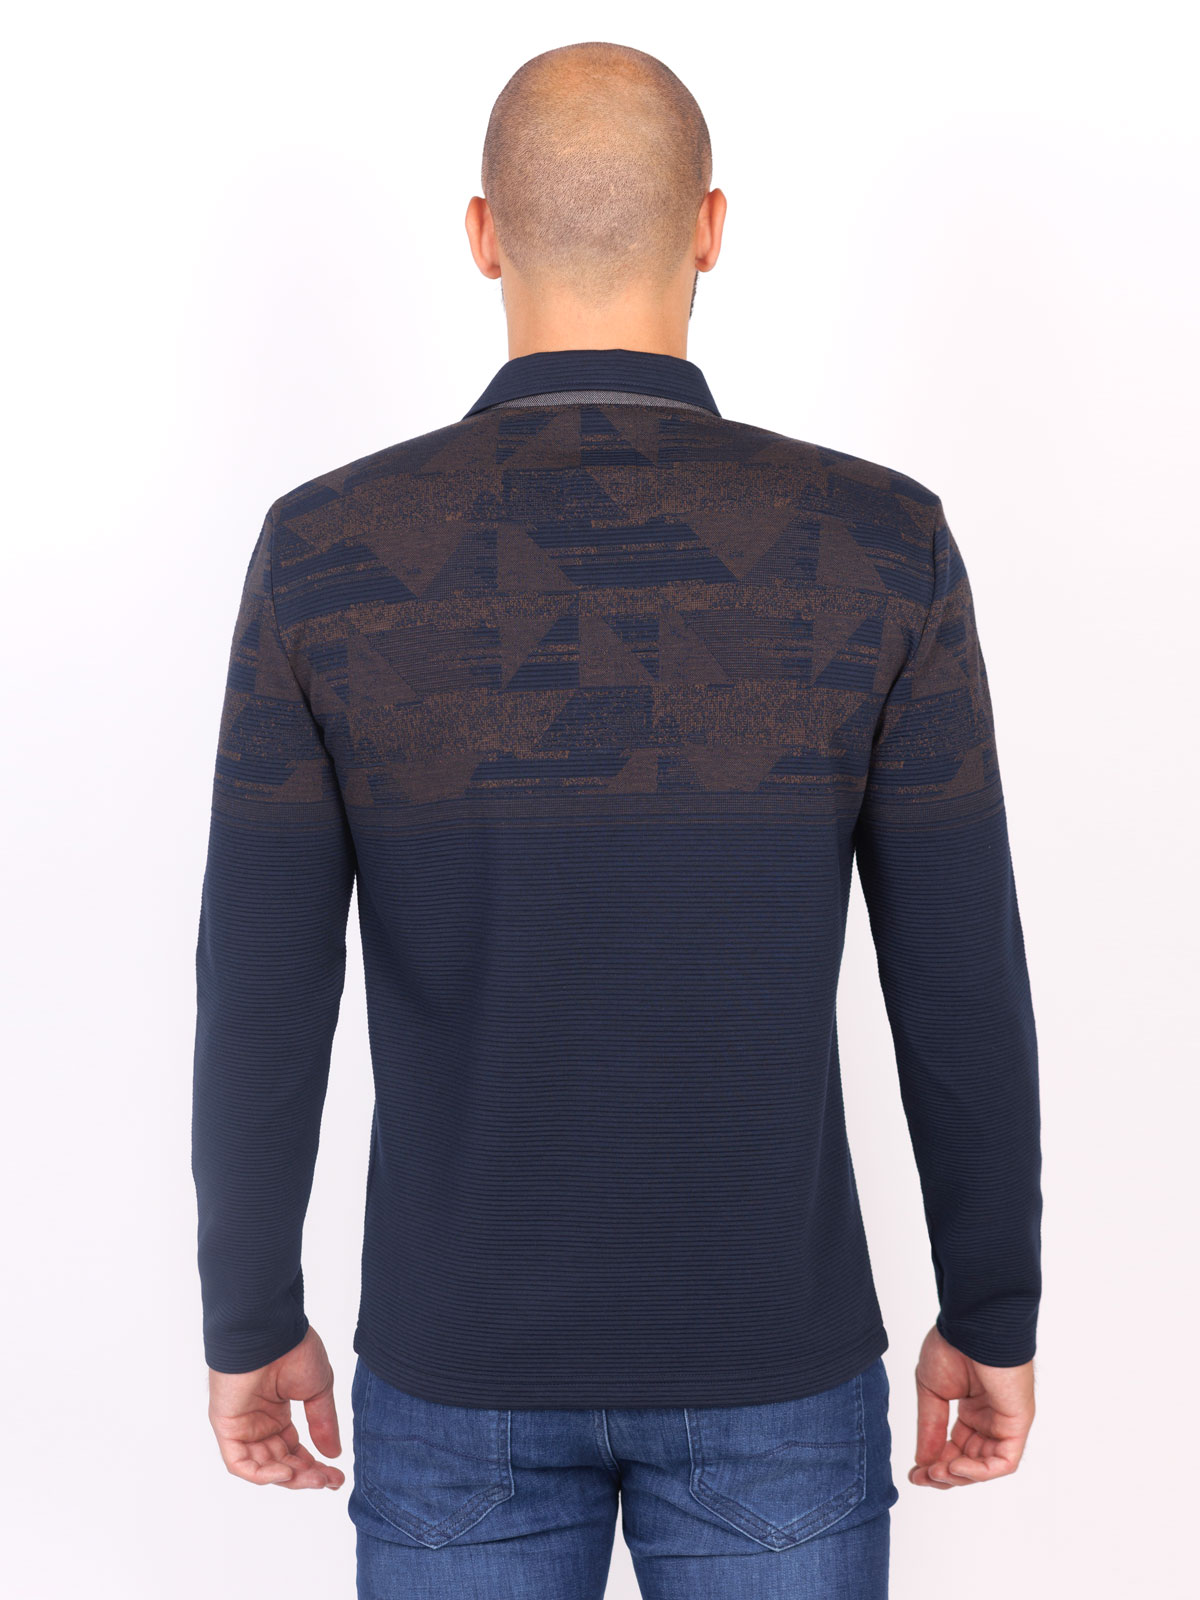 Blouse in dark blue with figures - 18262 € 37.68 img2